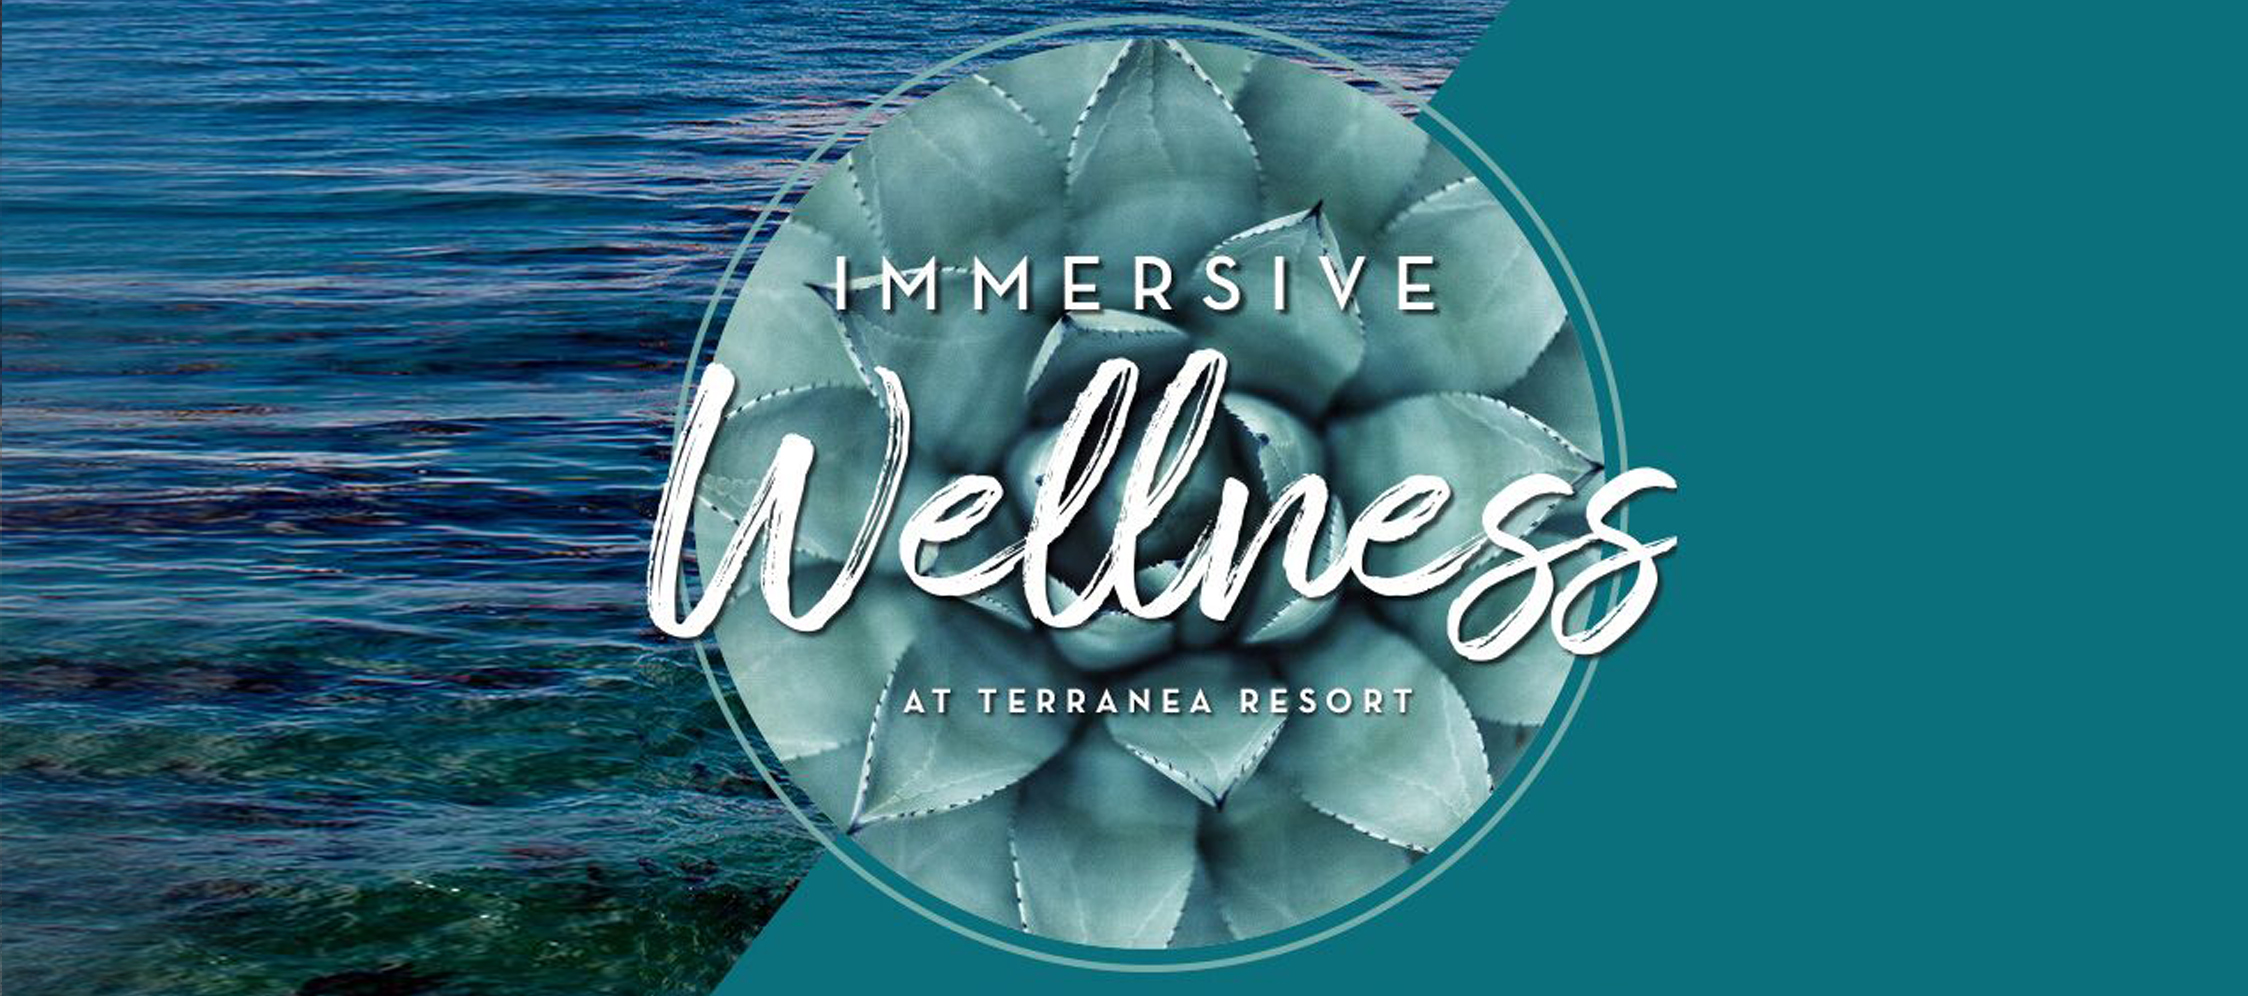 Nourish Your Mind, Body and Soul at Terranea’s Immersive Wellness Daycation